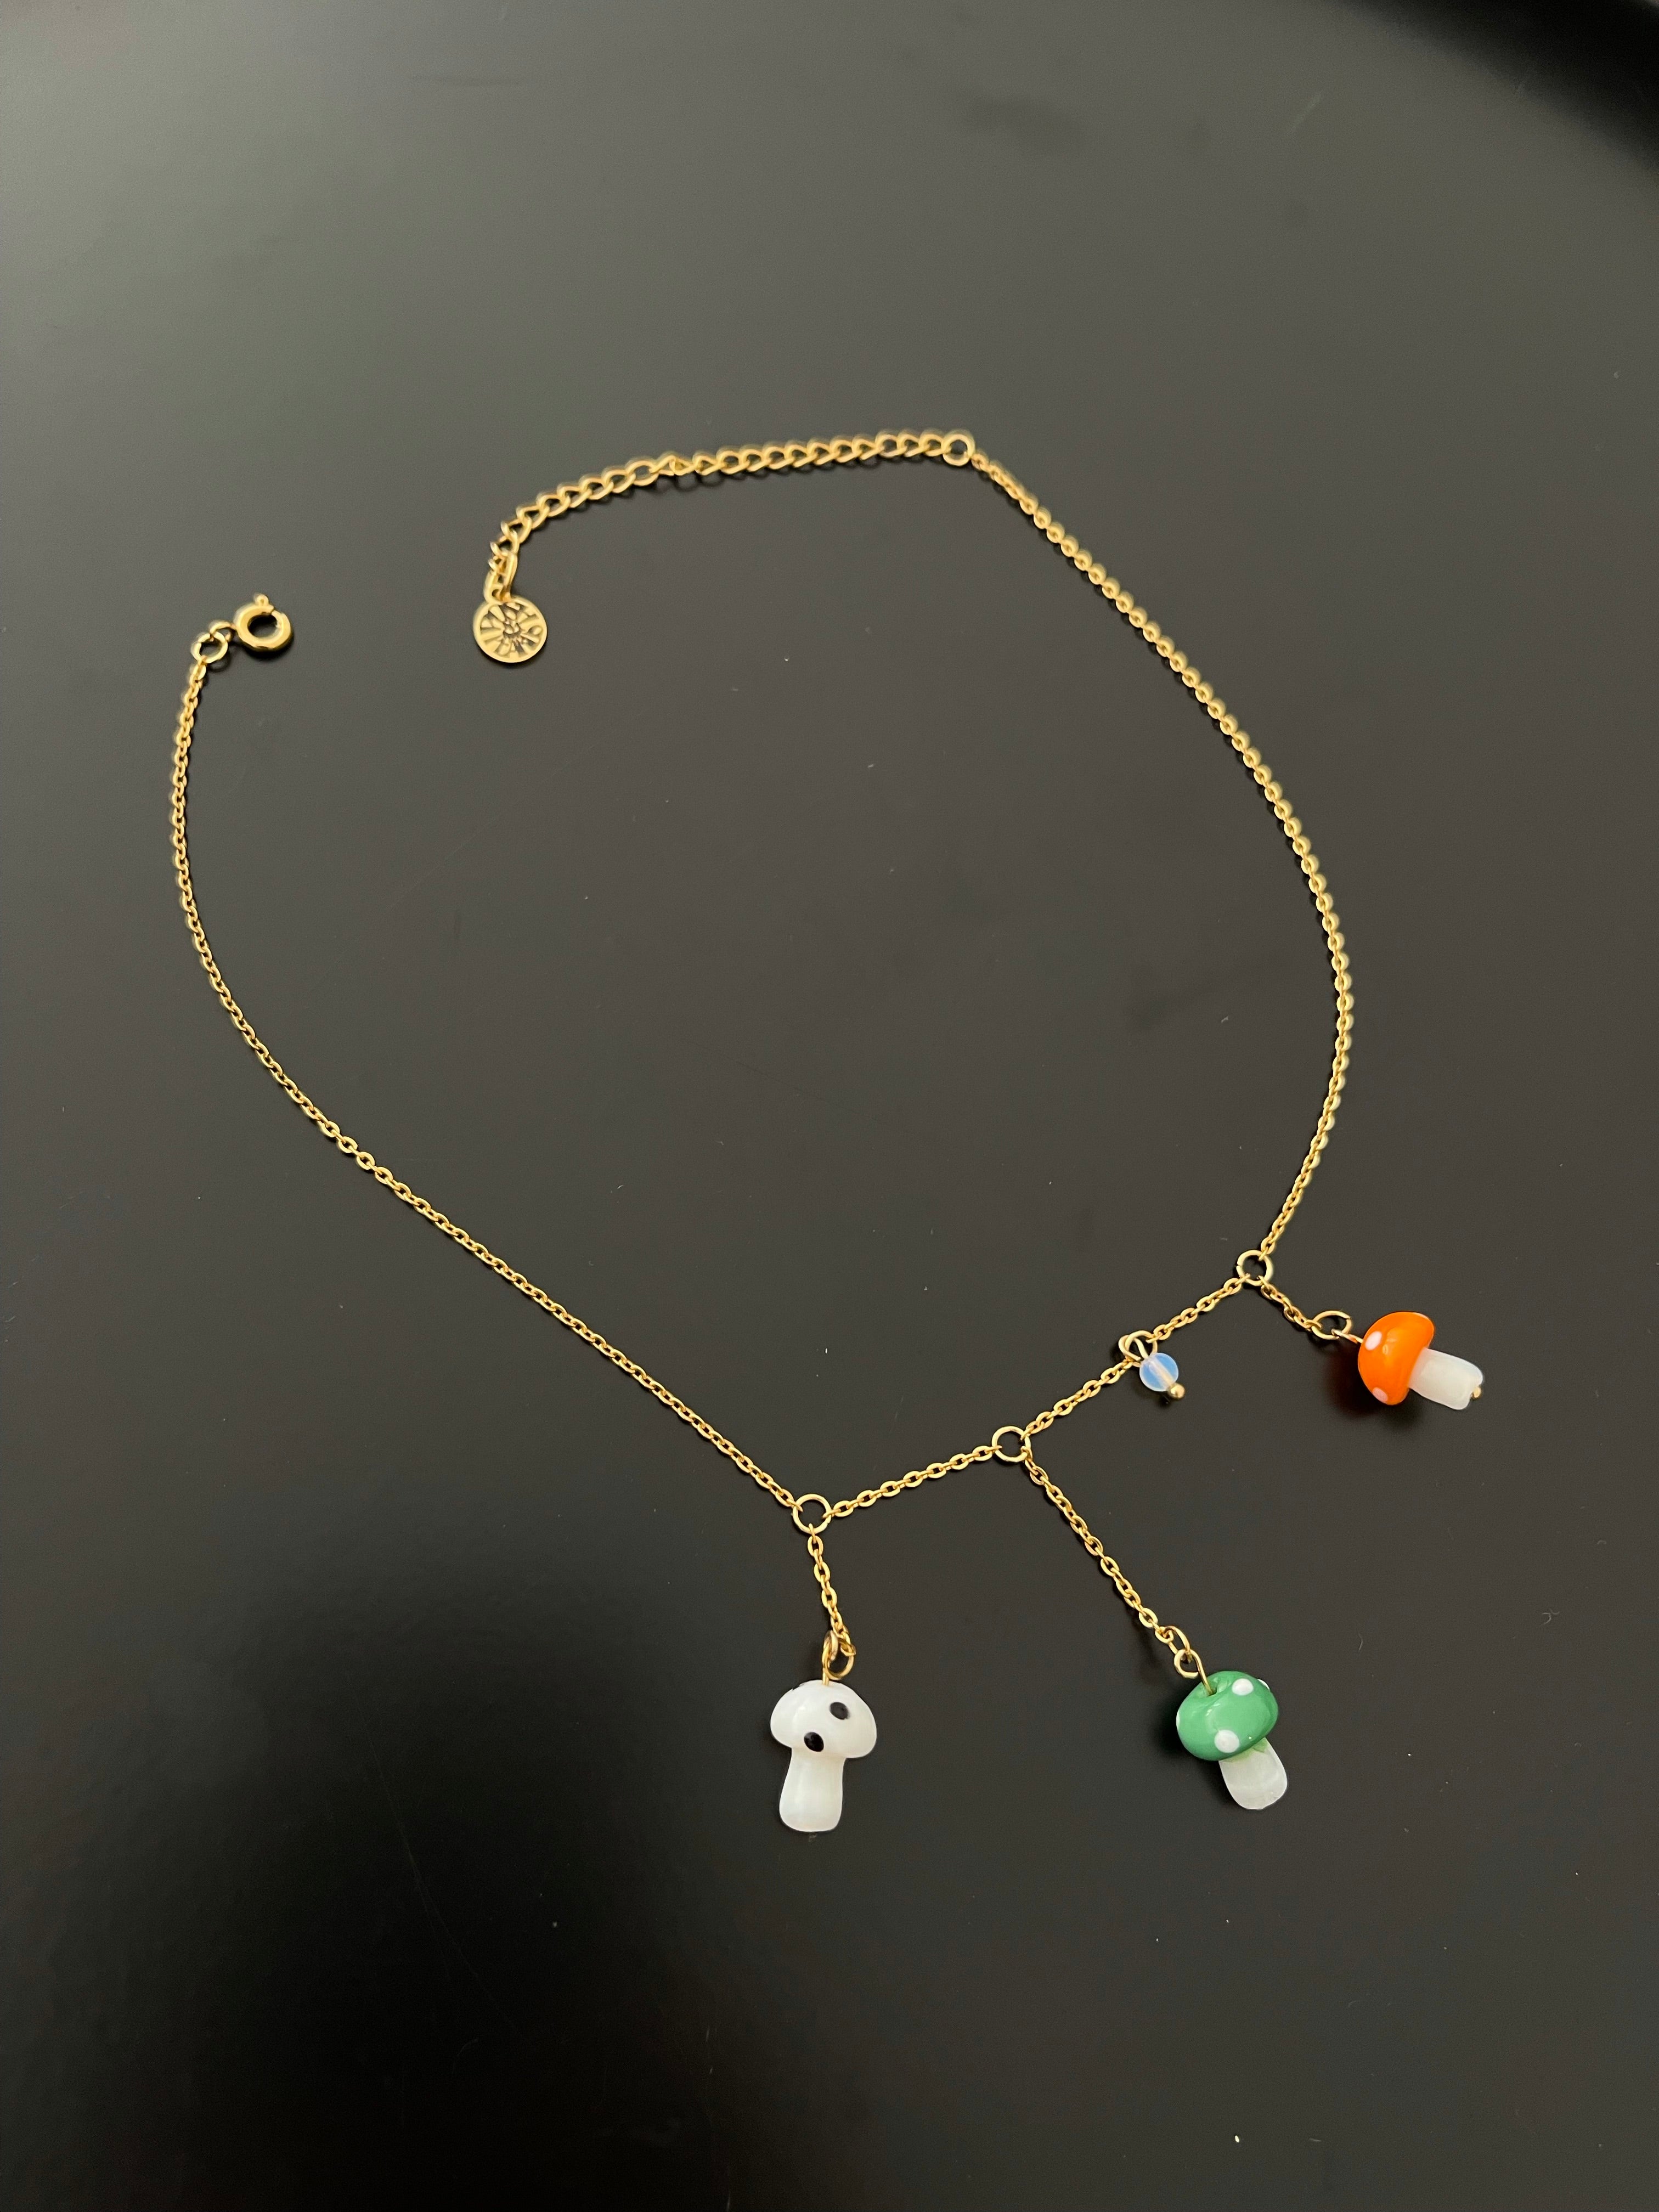 The "Maeve" Necklace